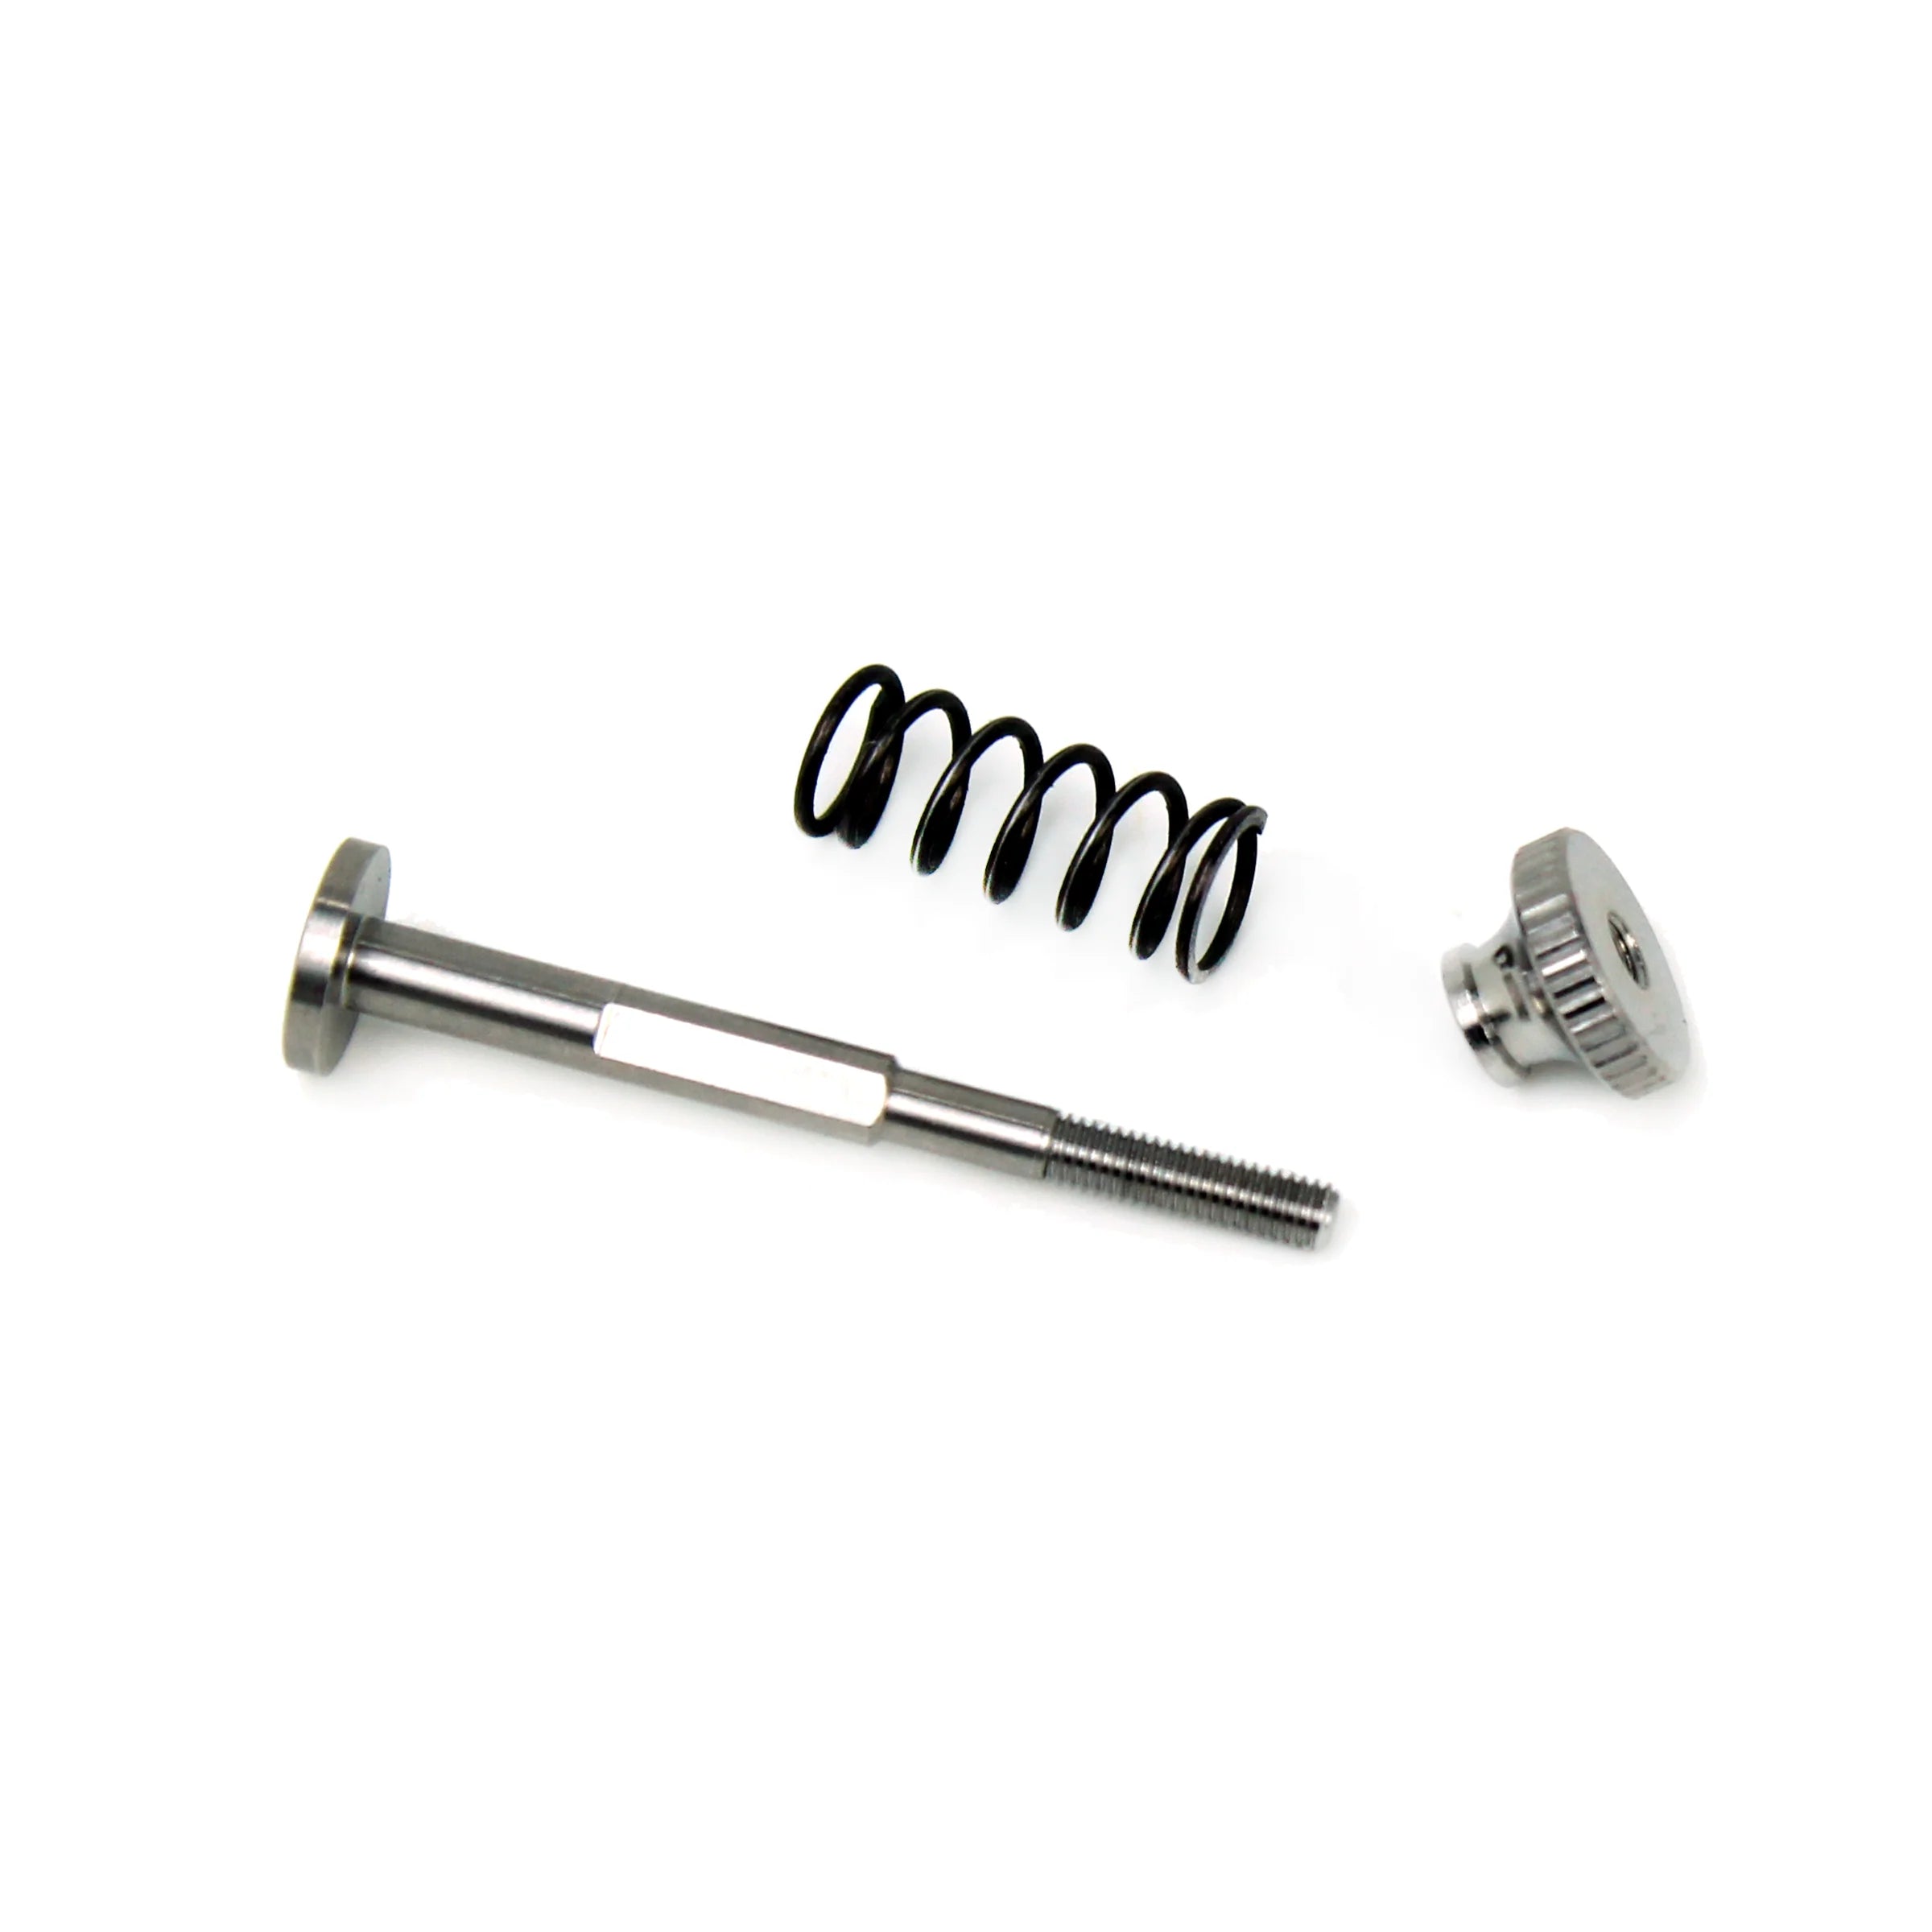 Micro Swiss Tensioning Hardware Kit for Direct Drive Extruder (M2705)